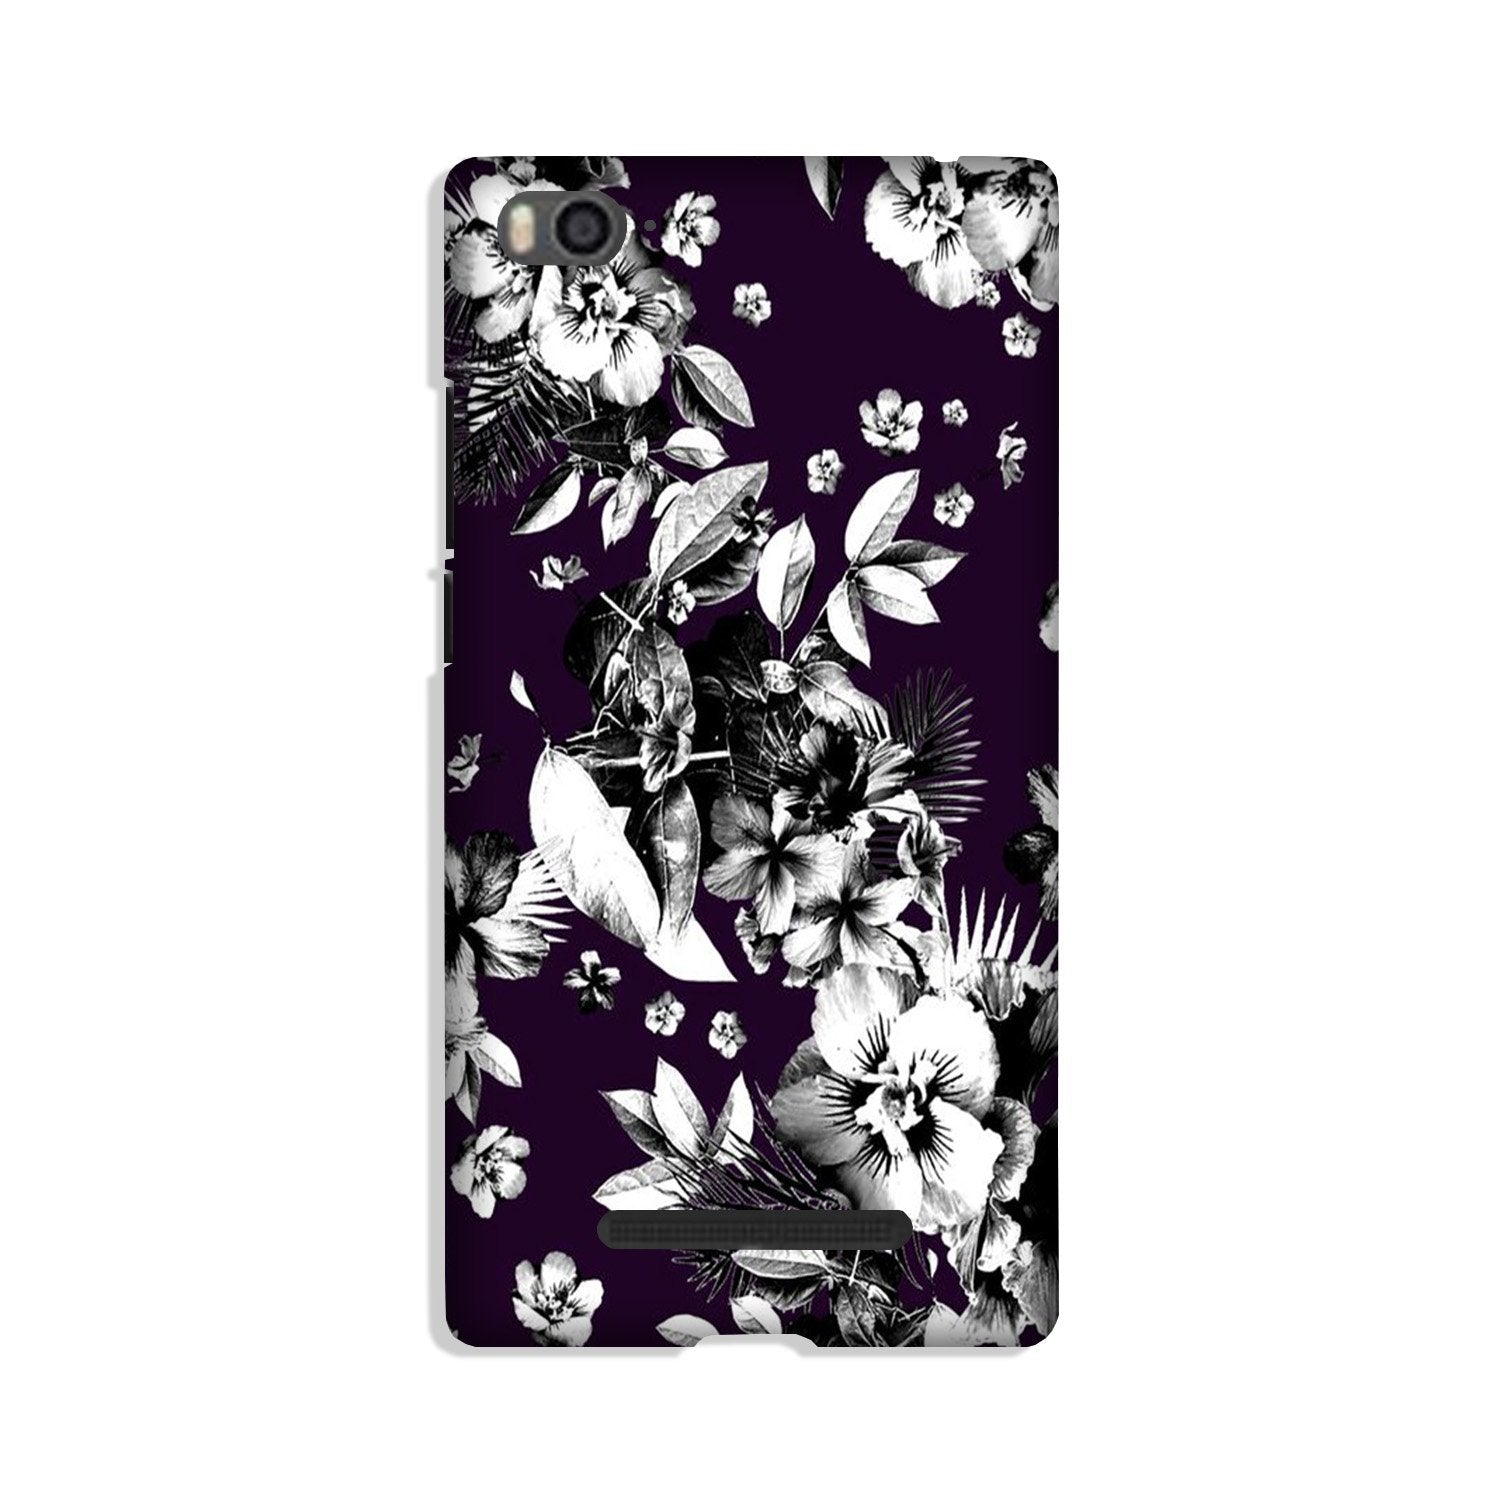 white flowers Case for Redmi 4A